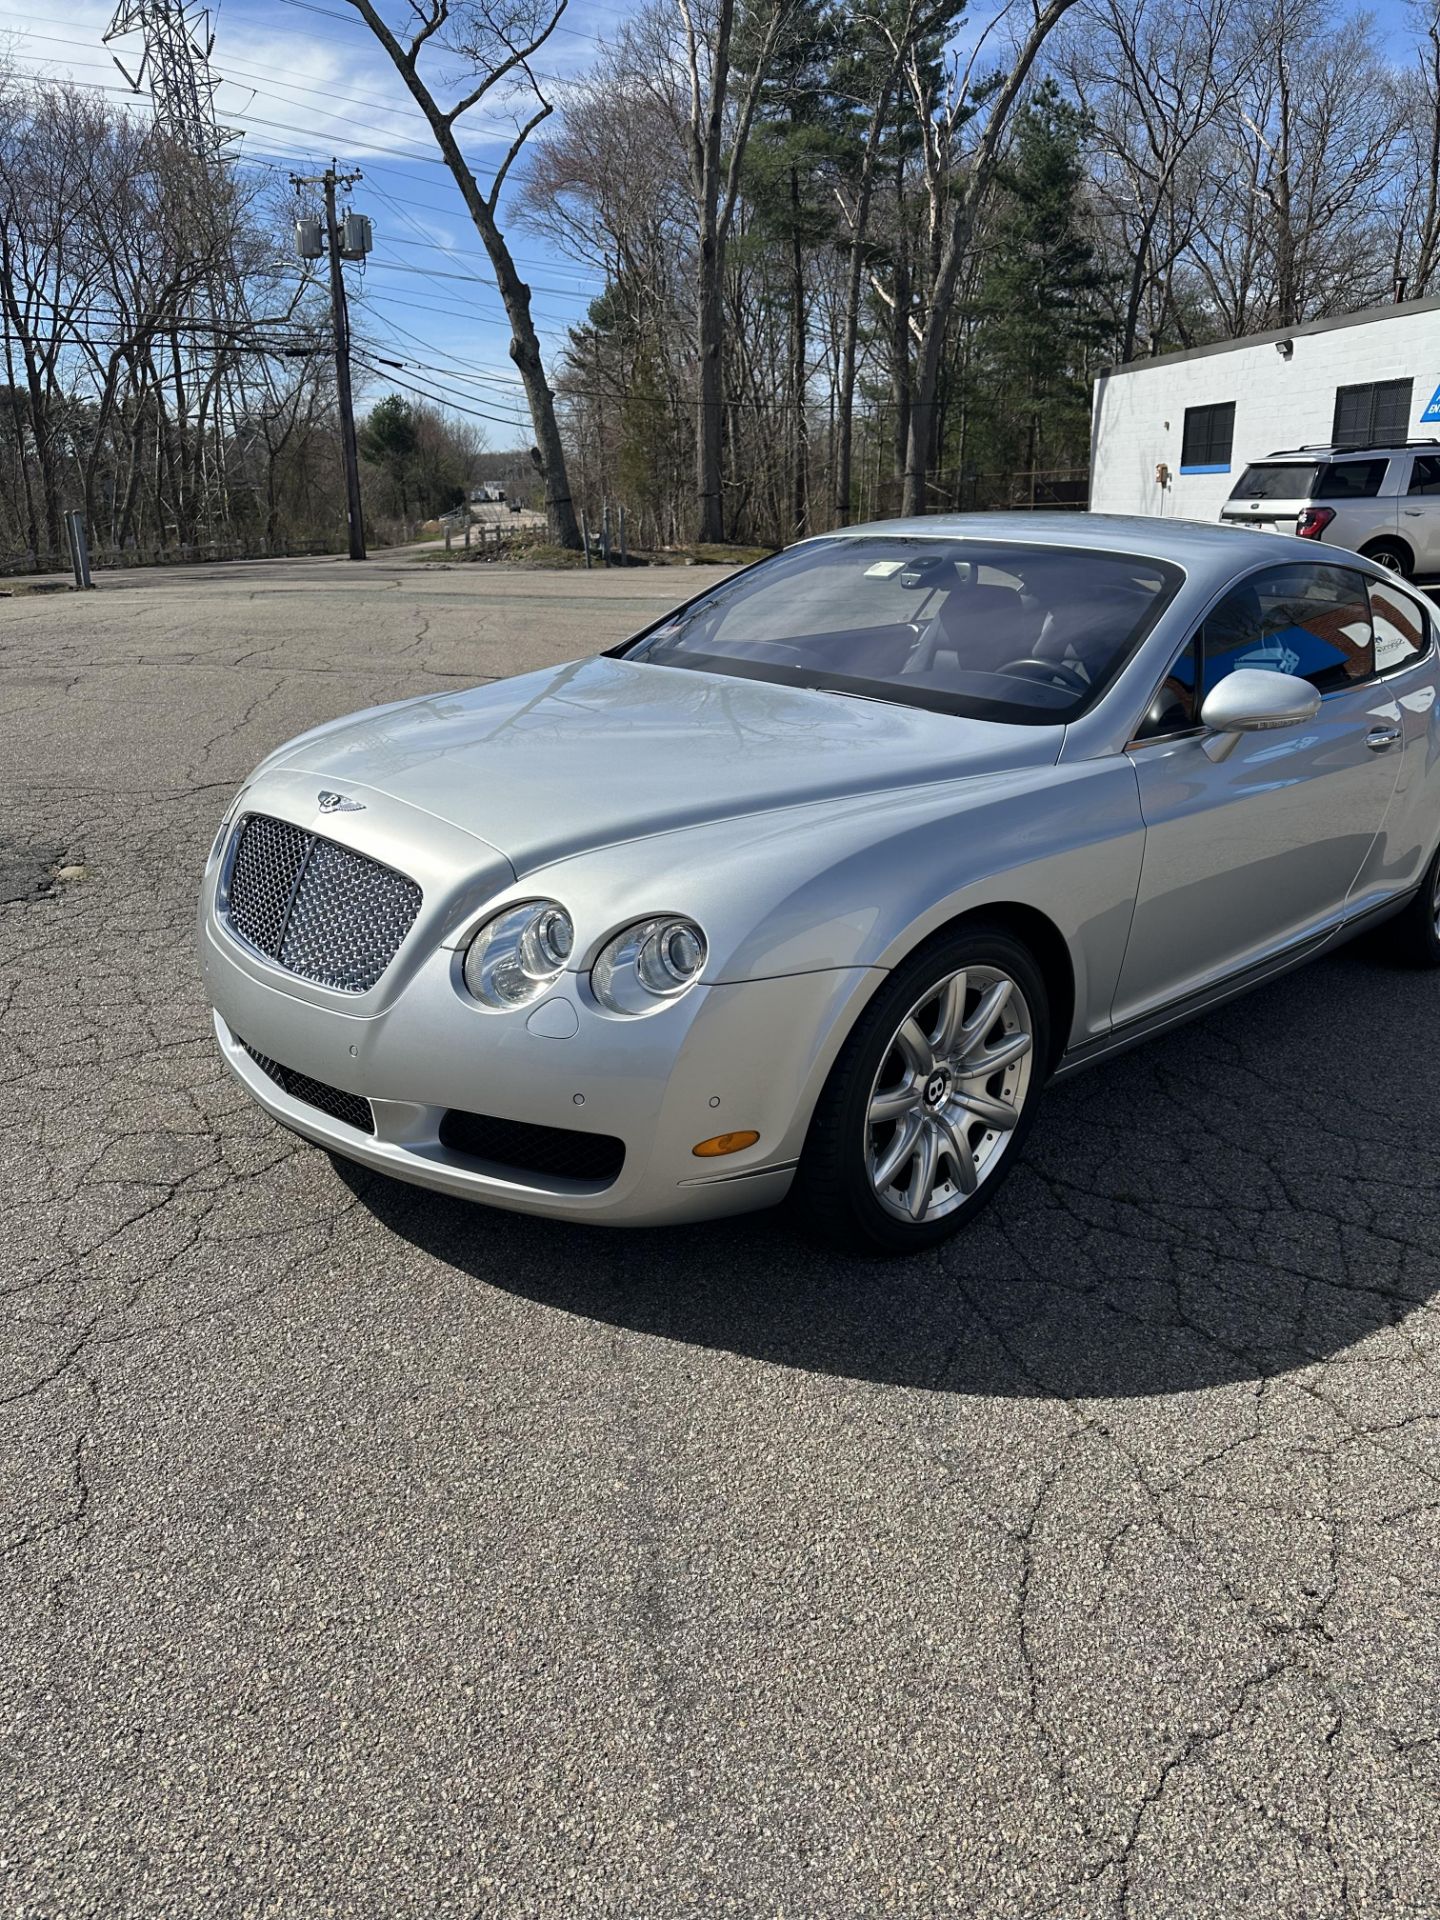 2005 Bentley Continental GT Coupe, Odom: 14,600, VIN#: SCBCR63W35C029782 - Image 4 of 24